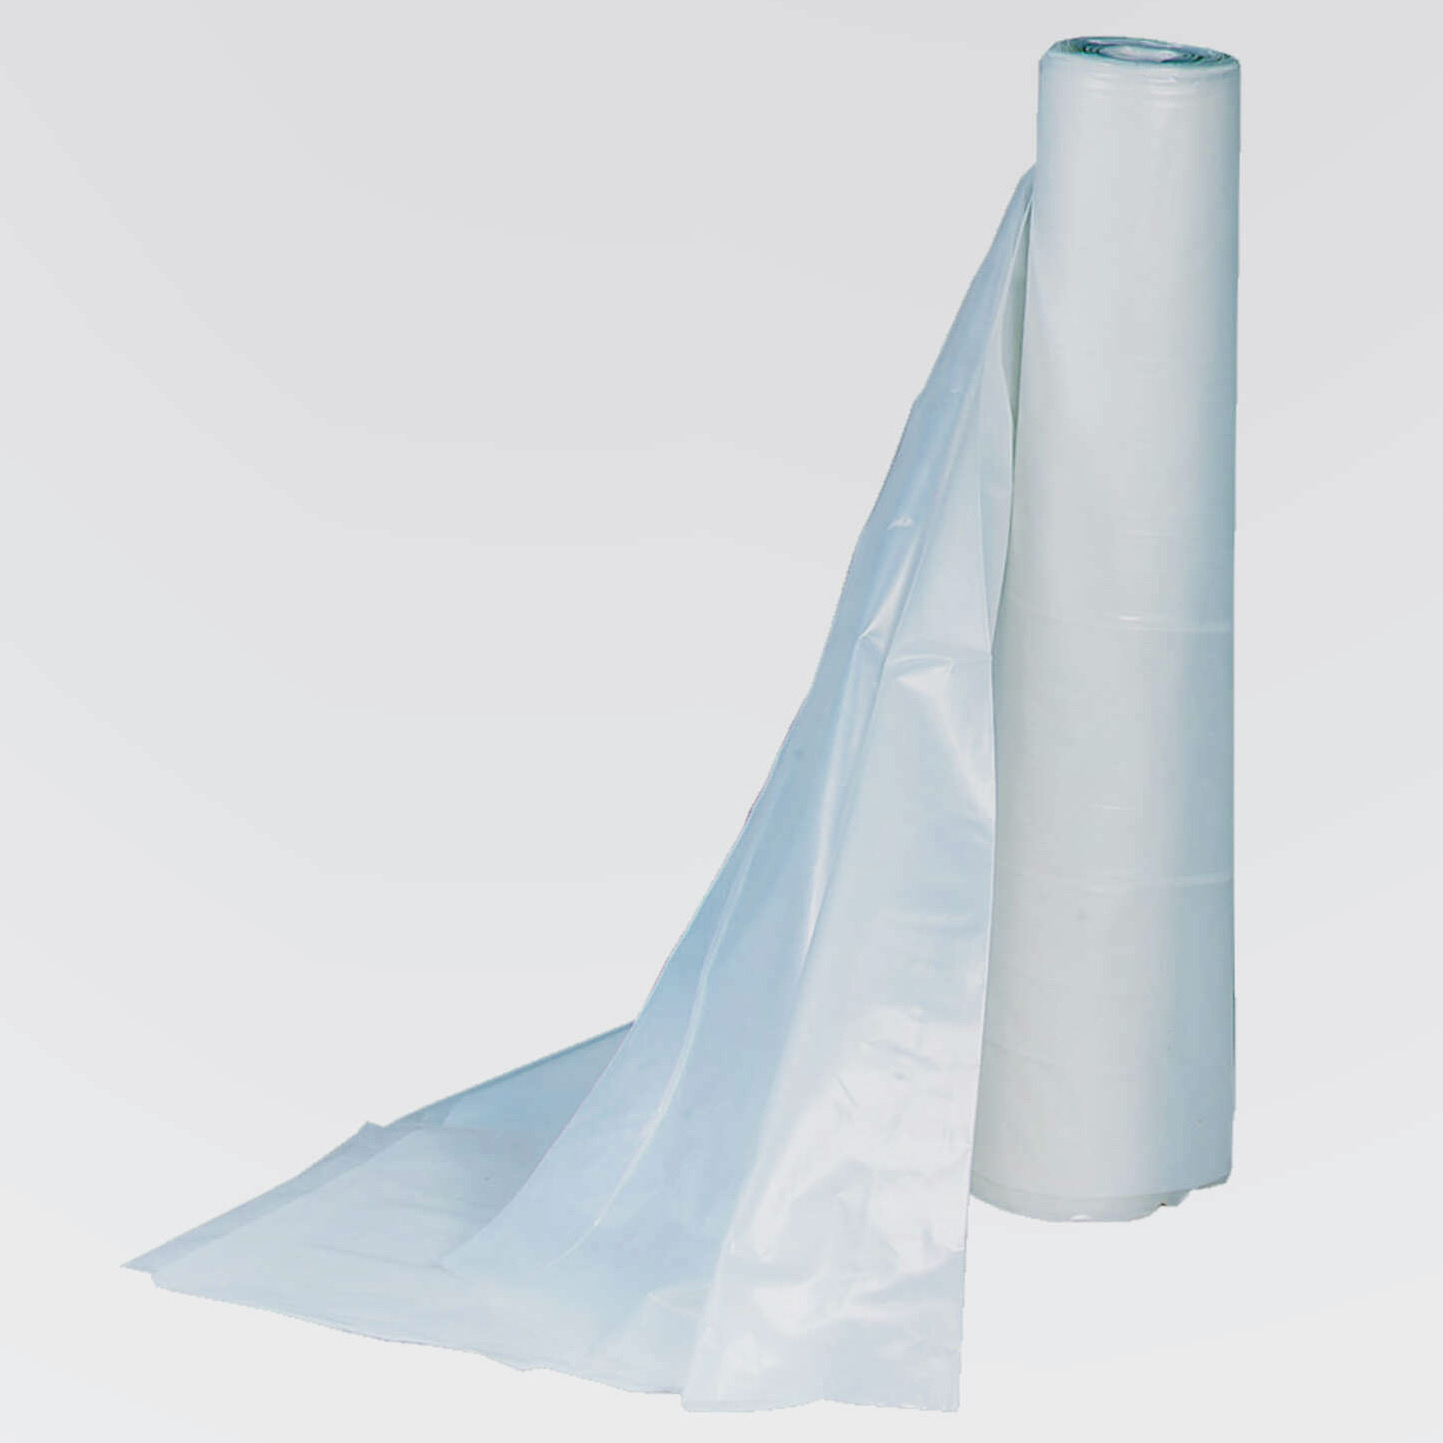 Plastic Sheeting 4 mil - The Craftsman Store